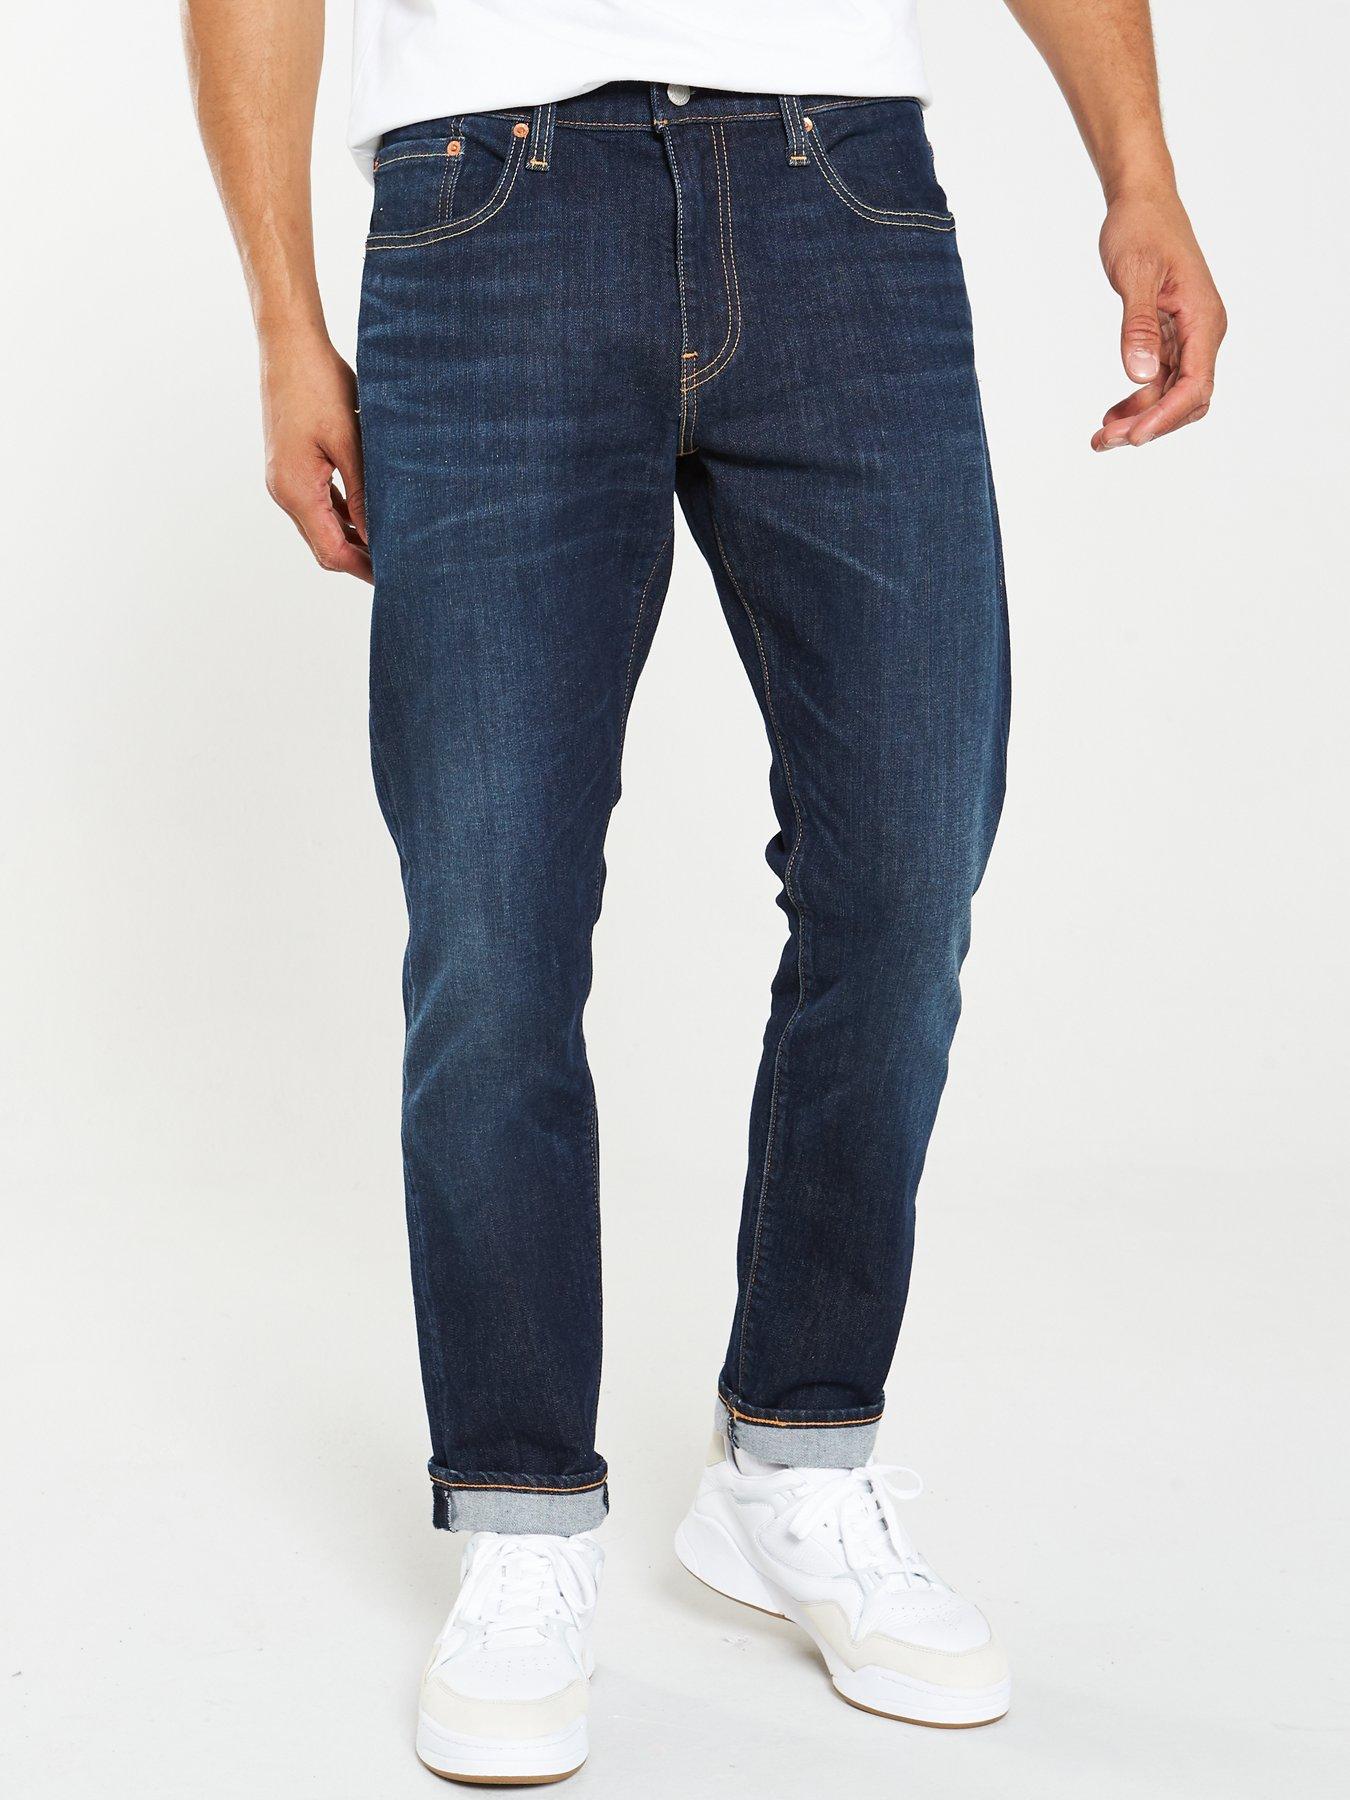 Levi's 512 Slim Taper Jeans (Clean Hands) Available at Irish UK